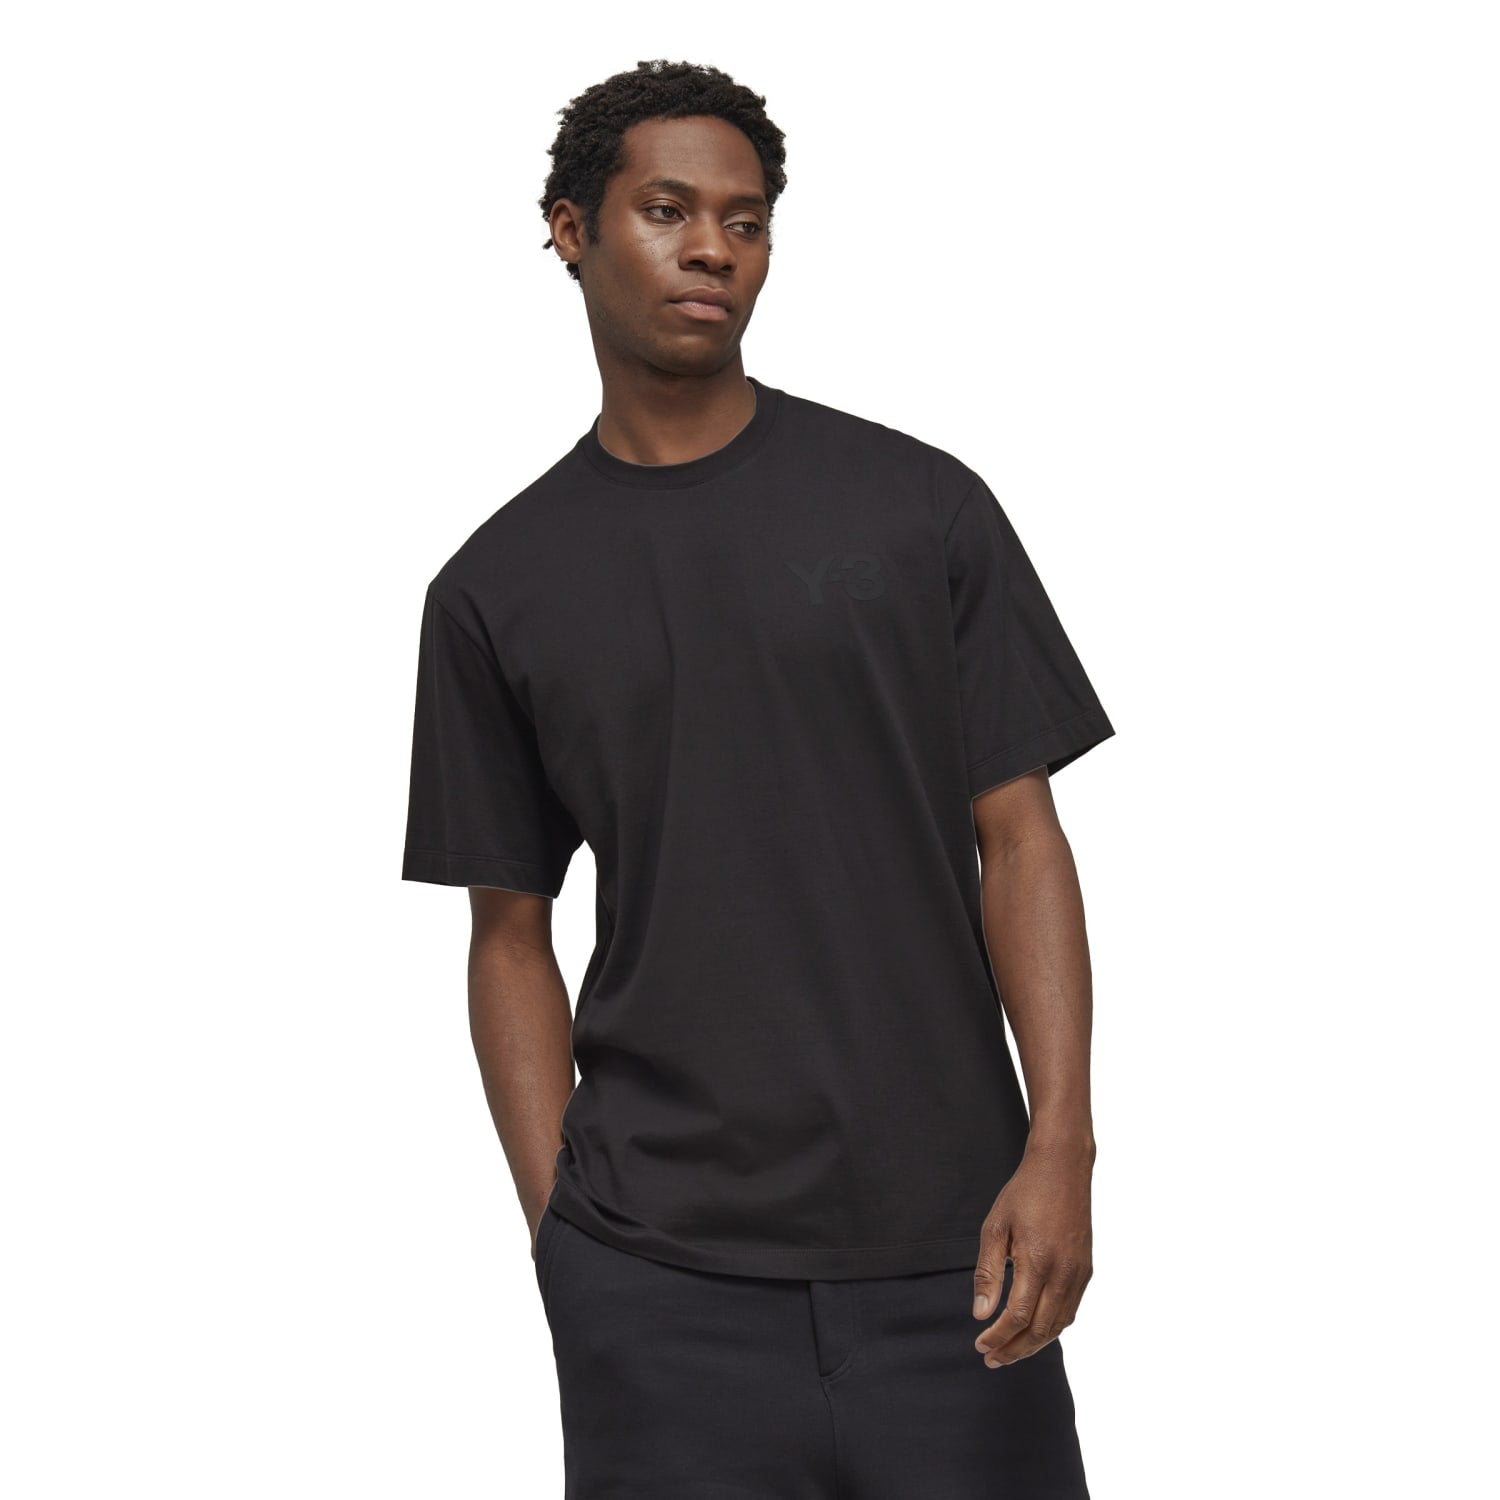 Adidas stock Men Y - 3 CL SS Tee Black FN3358 - T - SHIRTS Canada